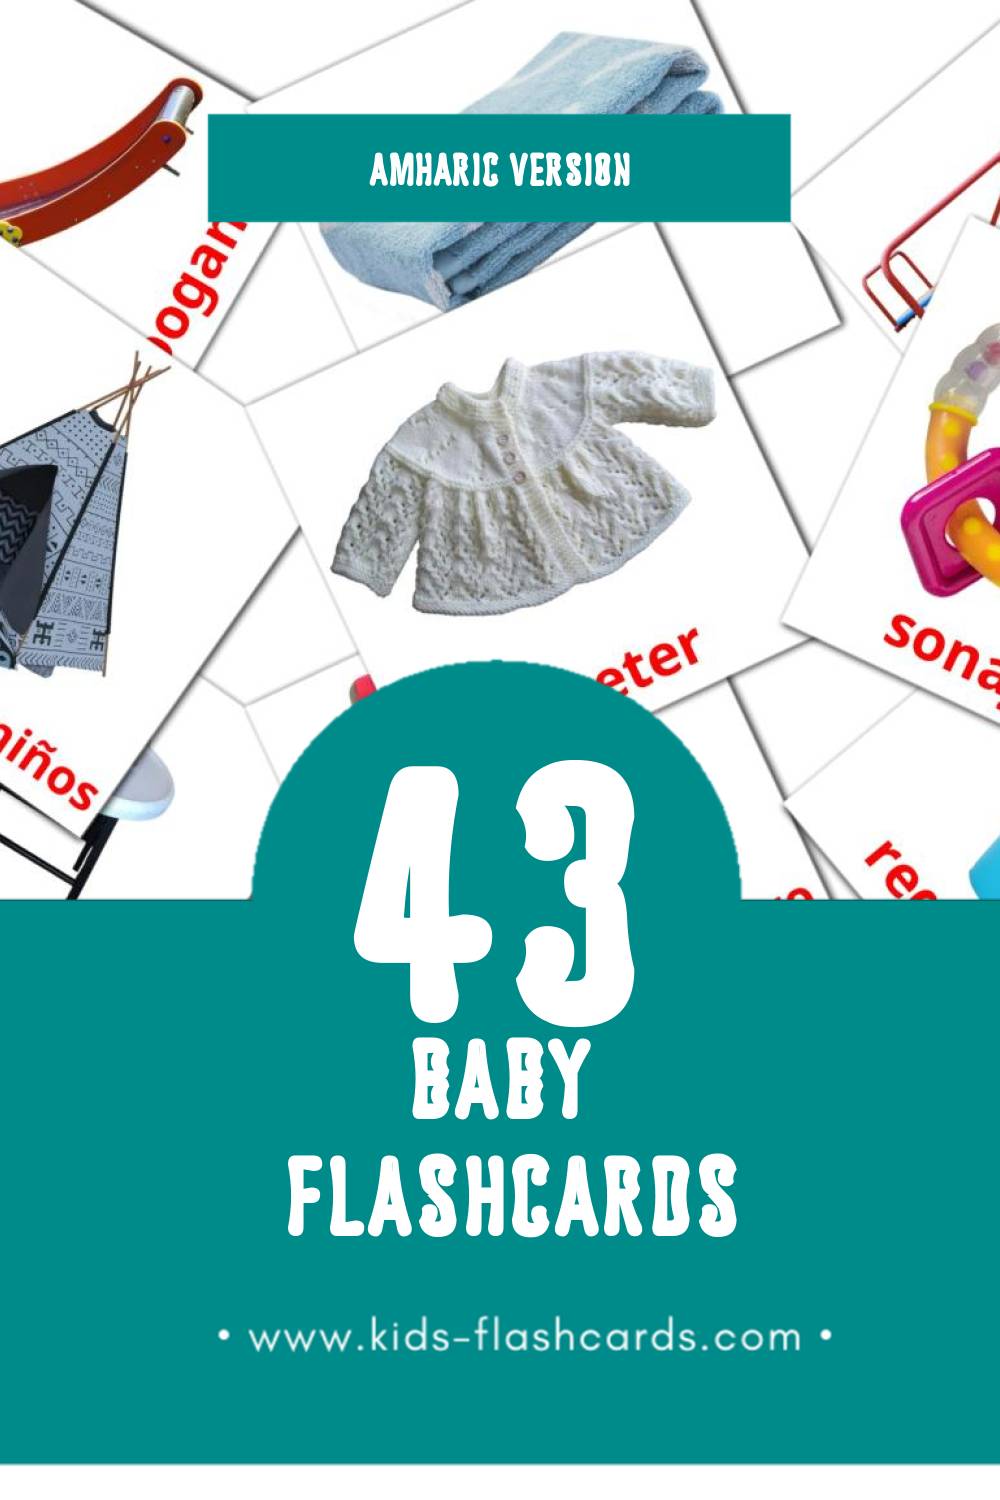 Visual Bebê  Flashcards for Toddlers (32 cards in Amharic)